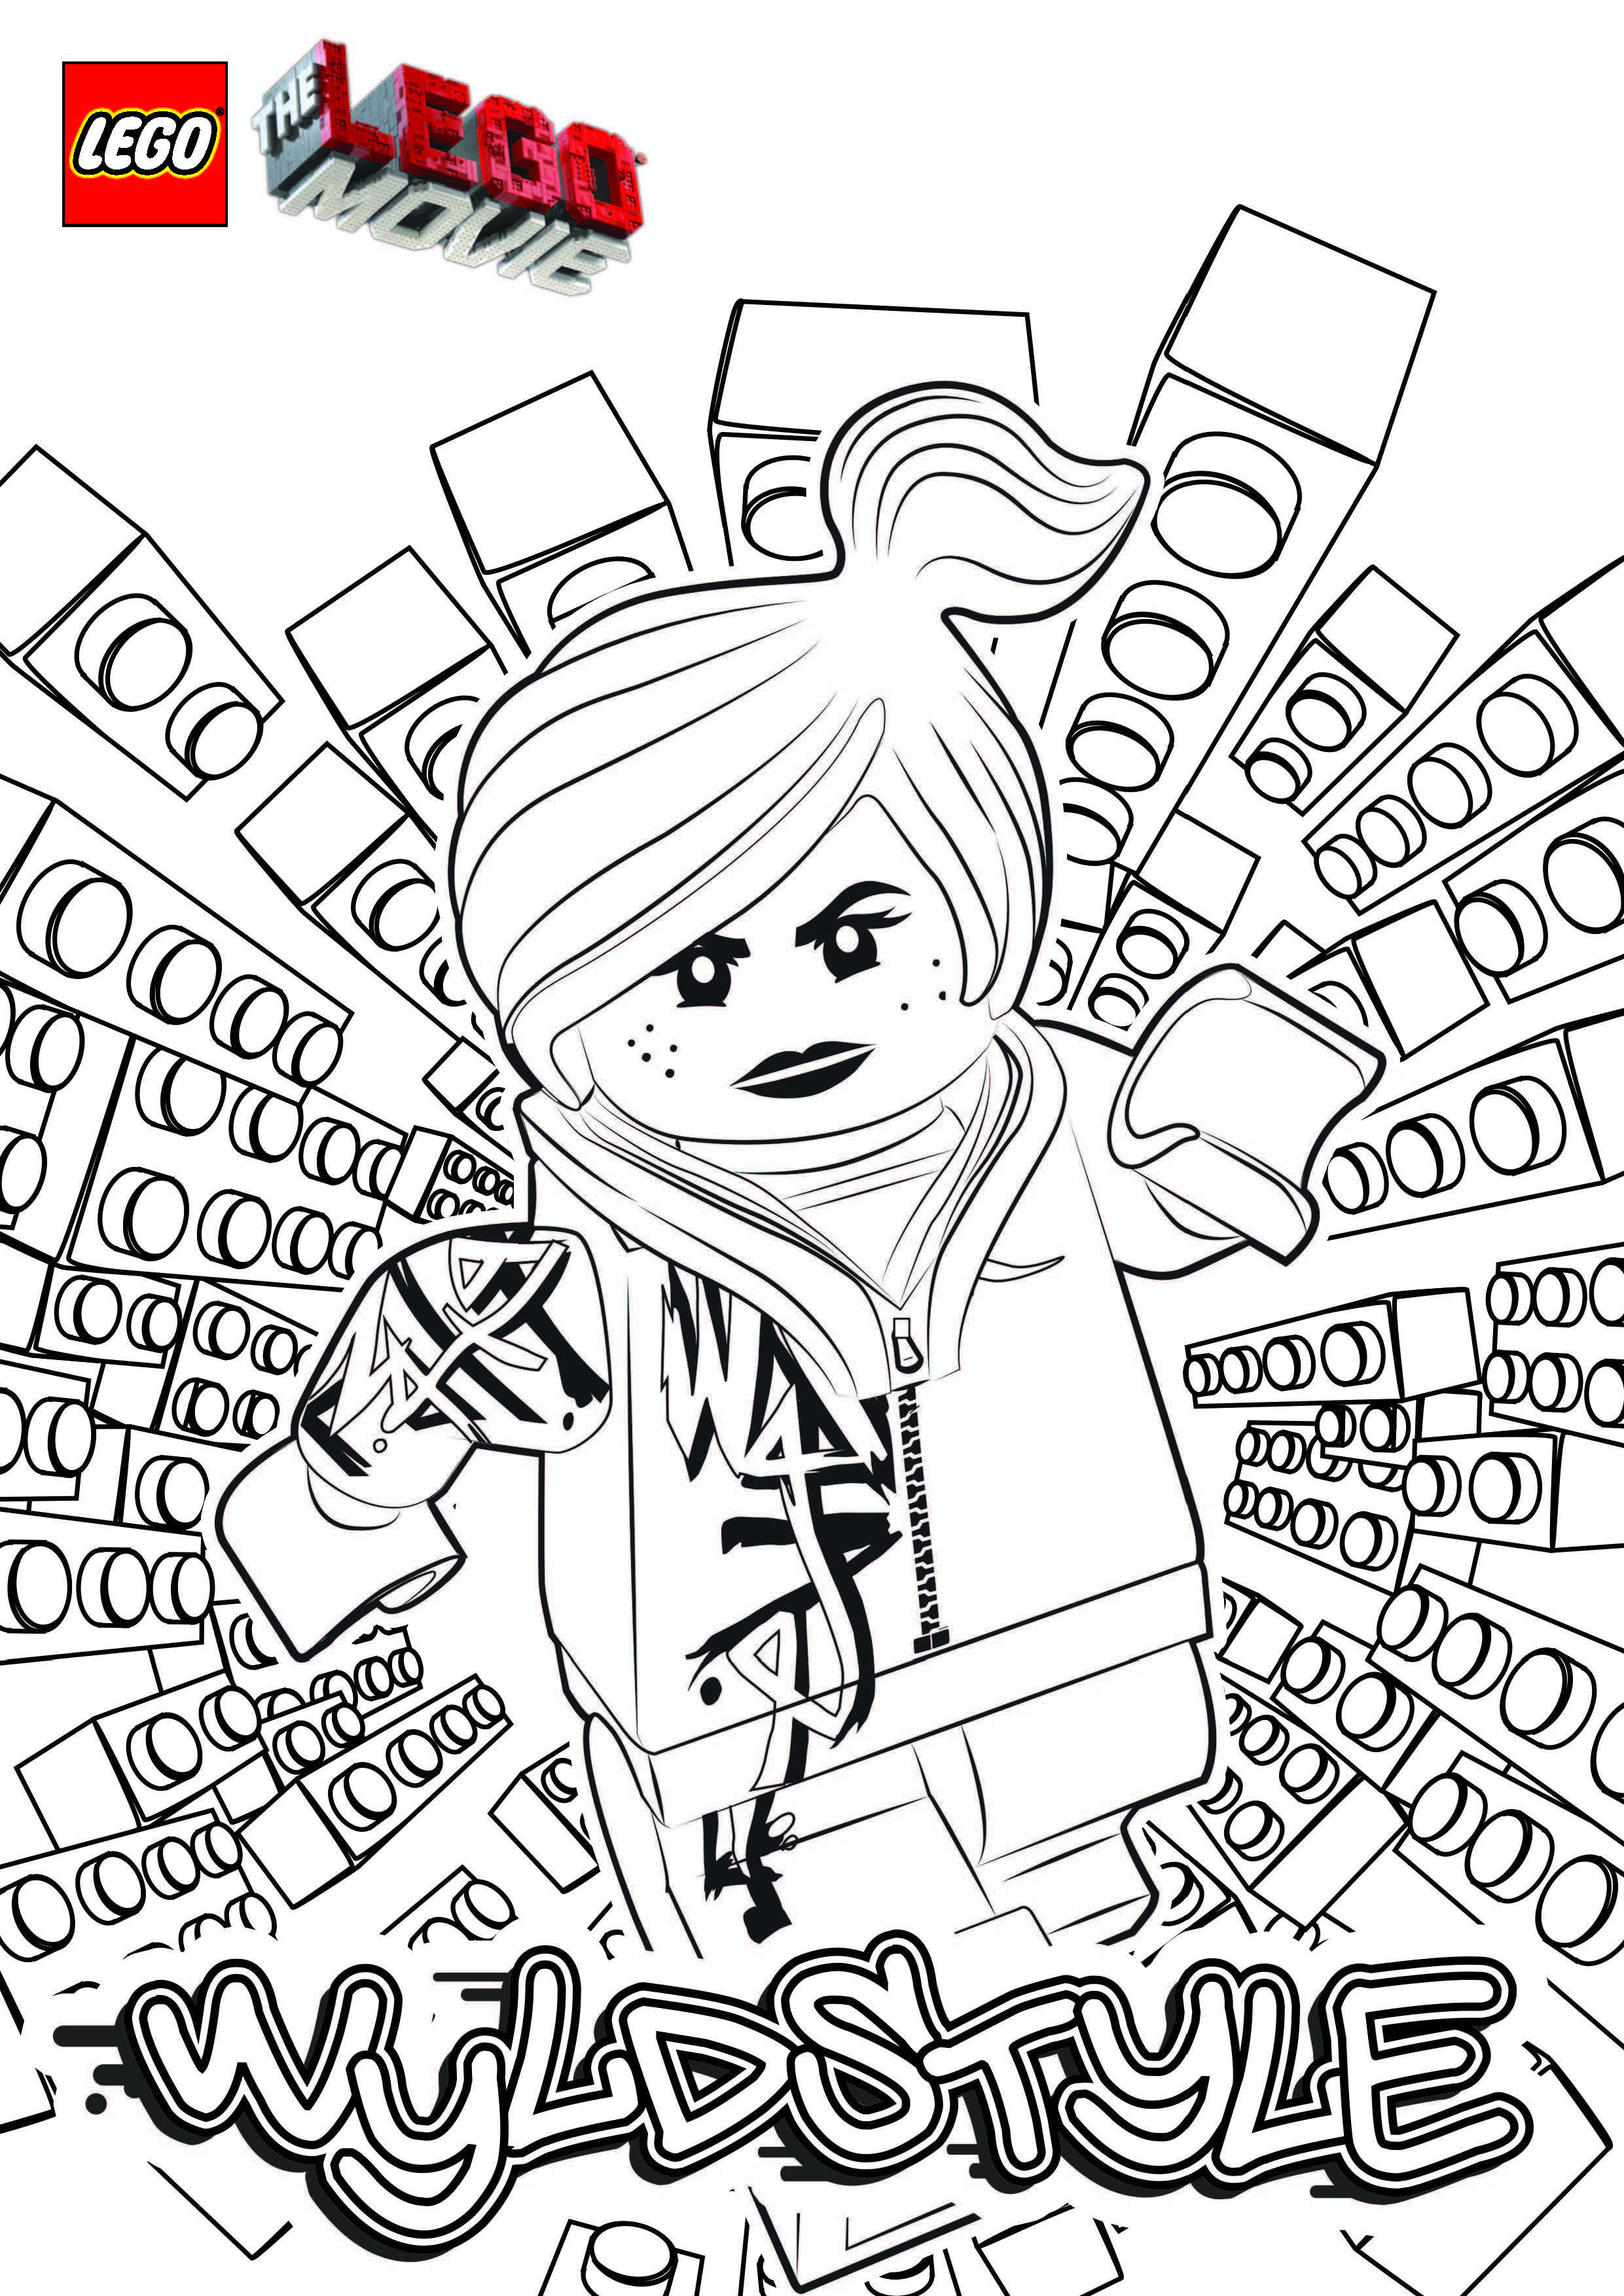 The Lego Movie | Coloring Pages for Kids and for Adults